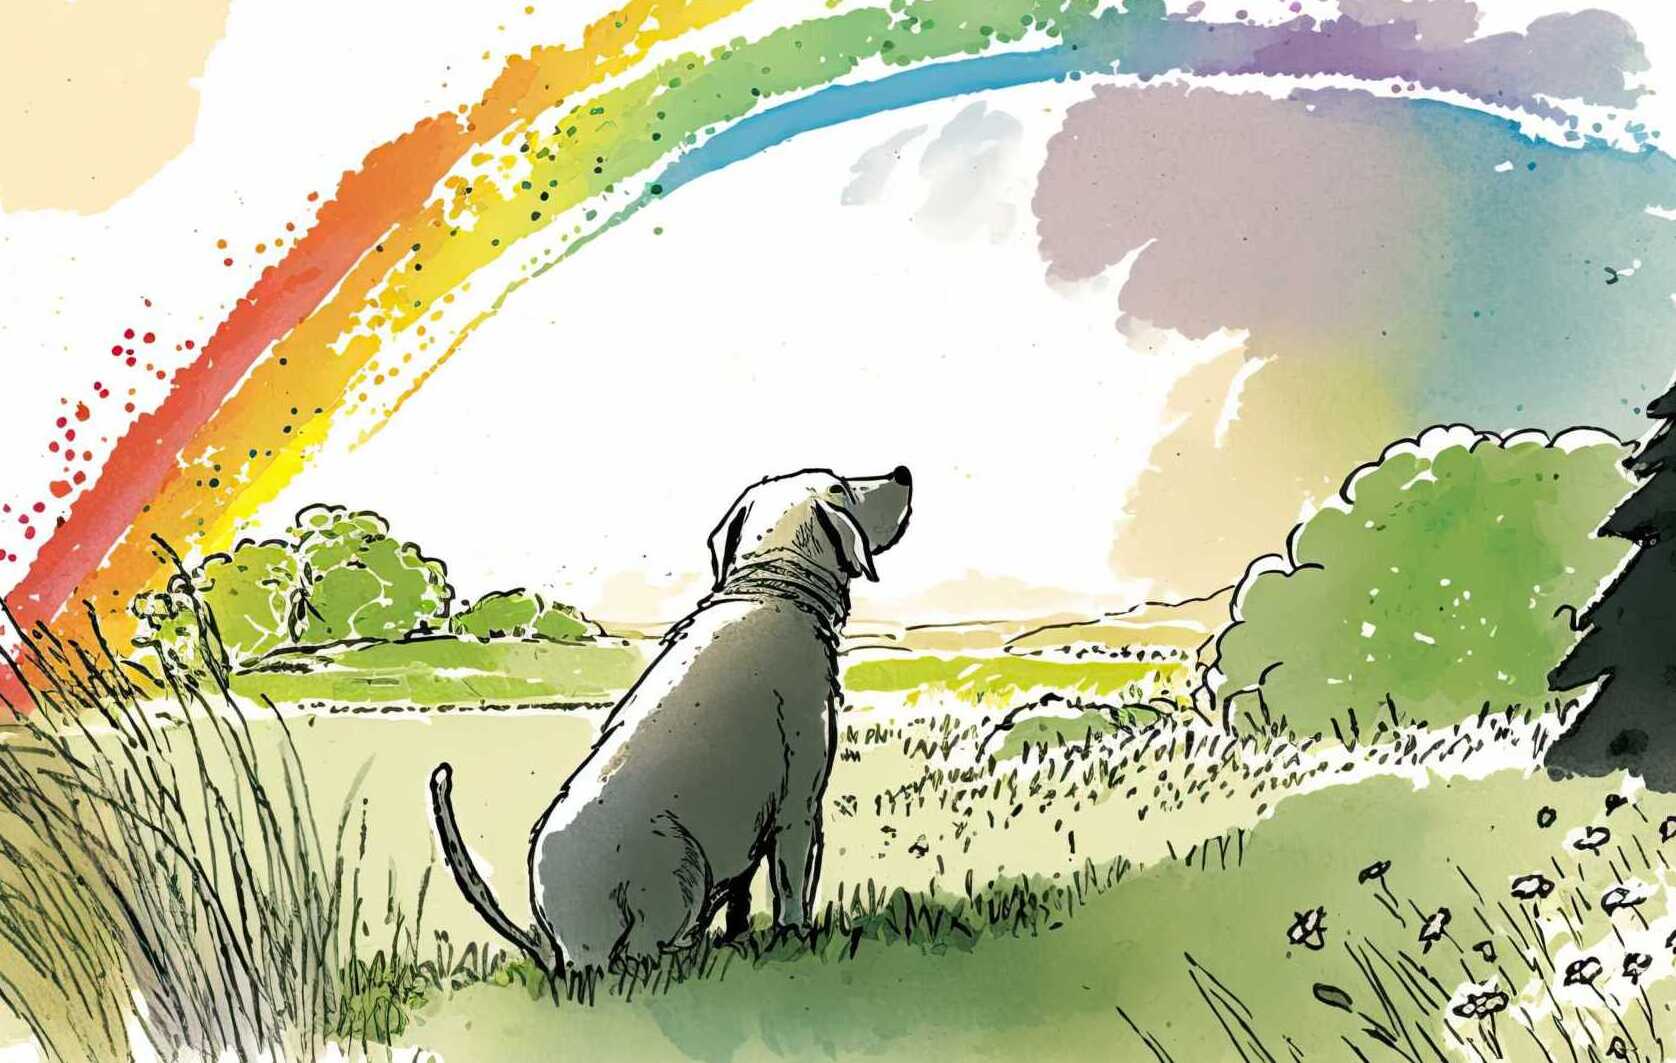 An illustration by LhasaLife of a dog staring into a rainbow over a meadow